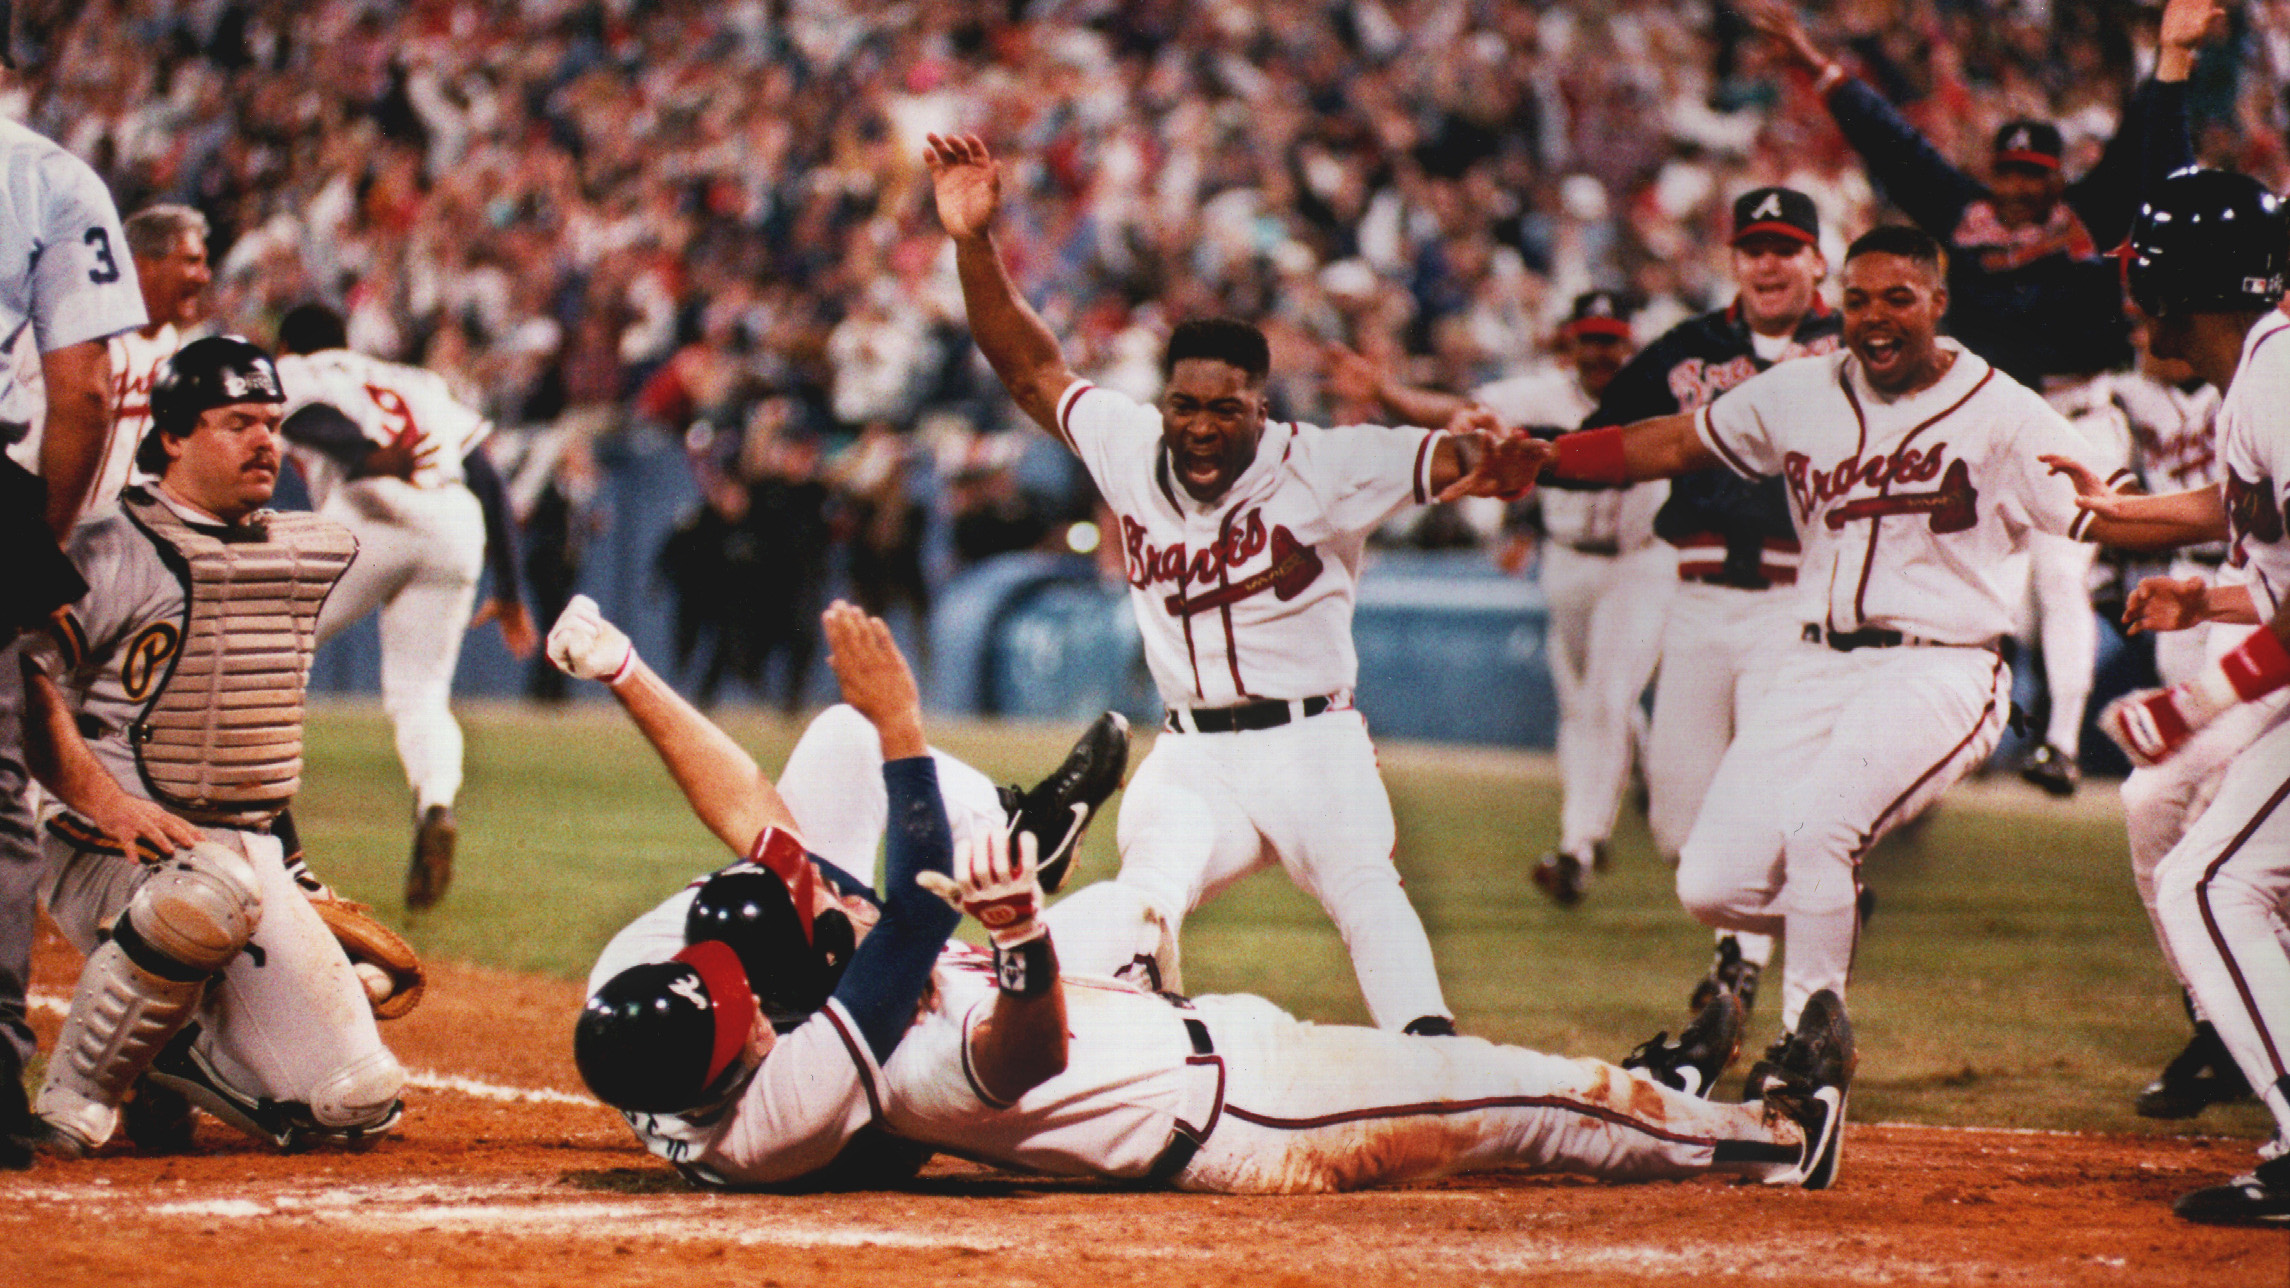 Remembering Game 7 of the 1992 NLCS